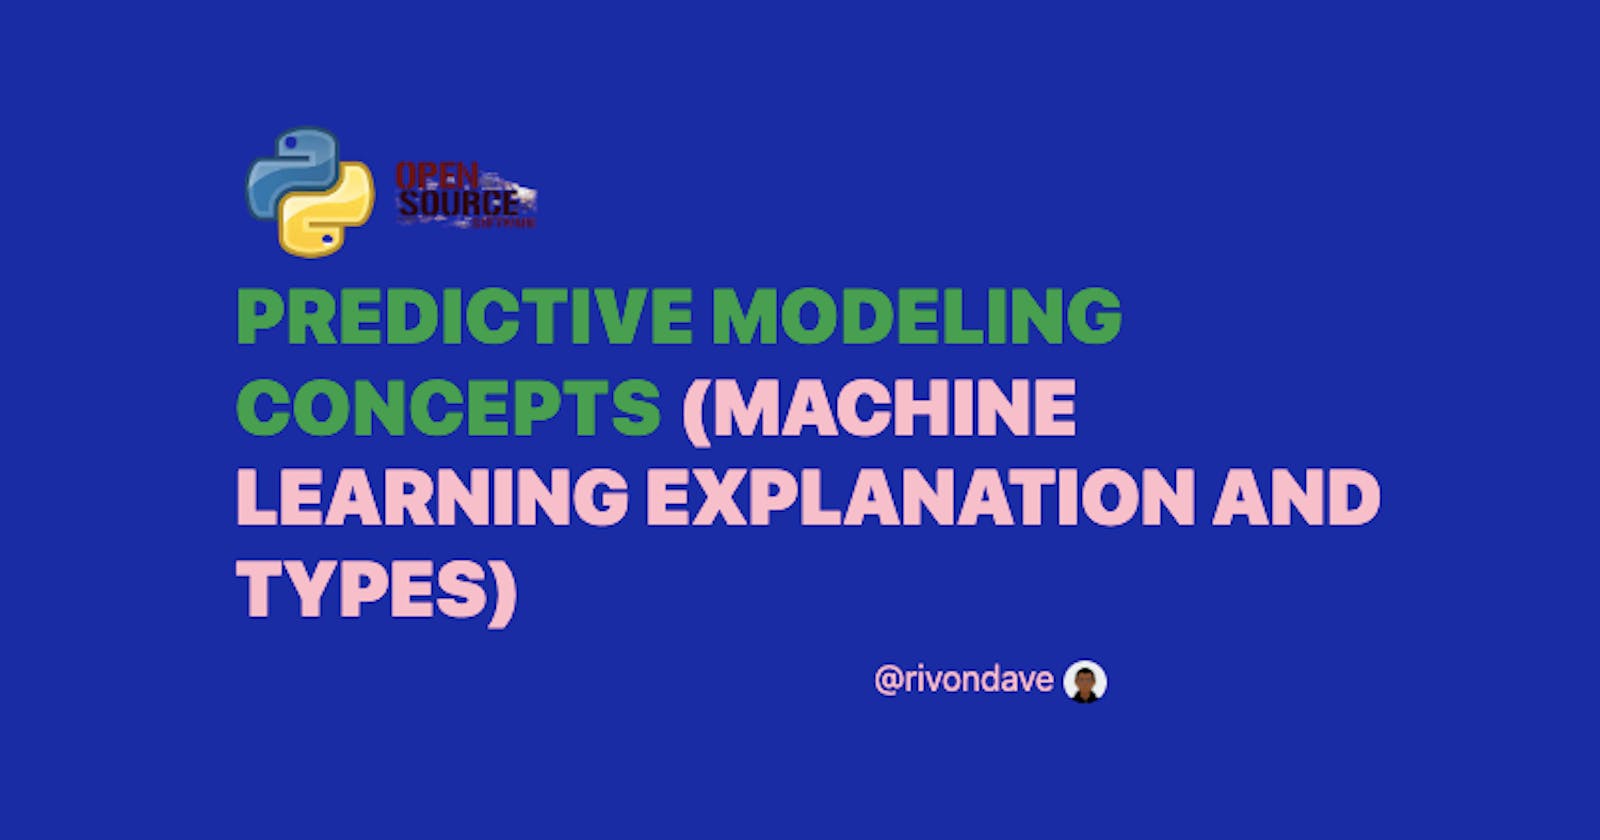 Predictive Modeling Concepts (Machine Learning Explanation and Types)